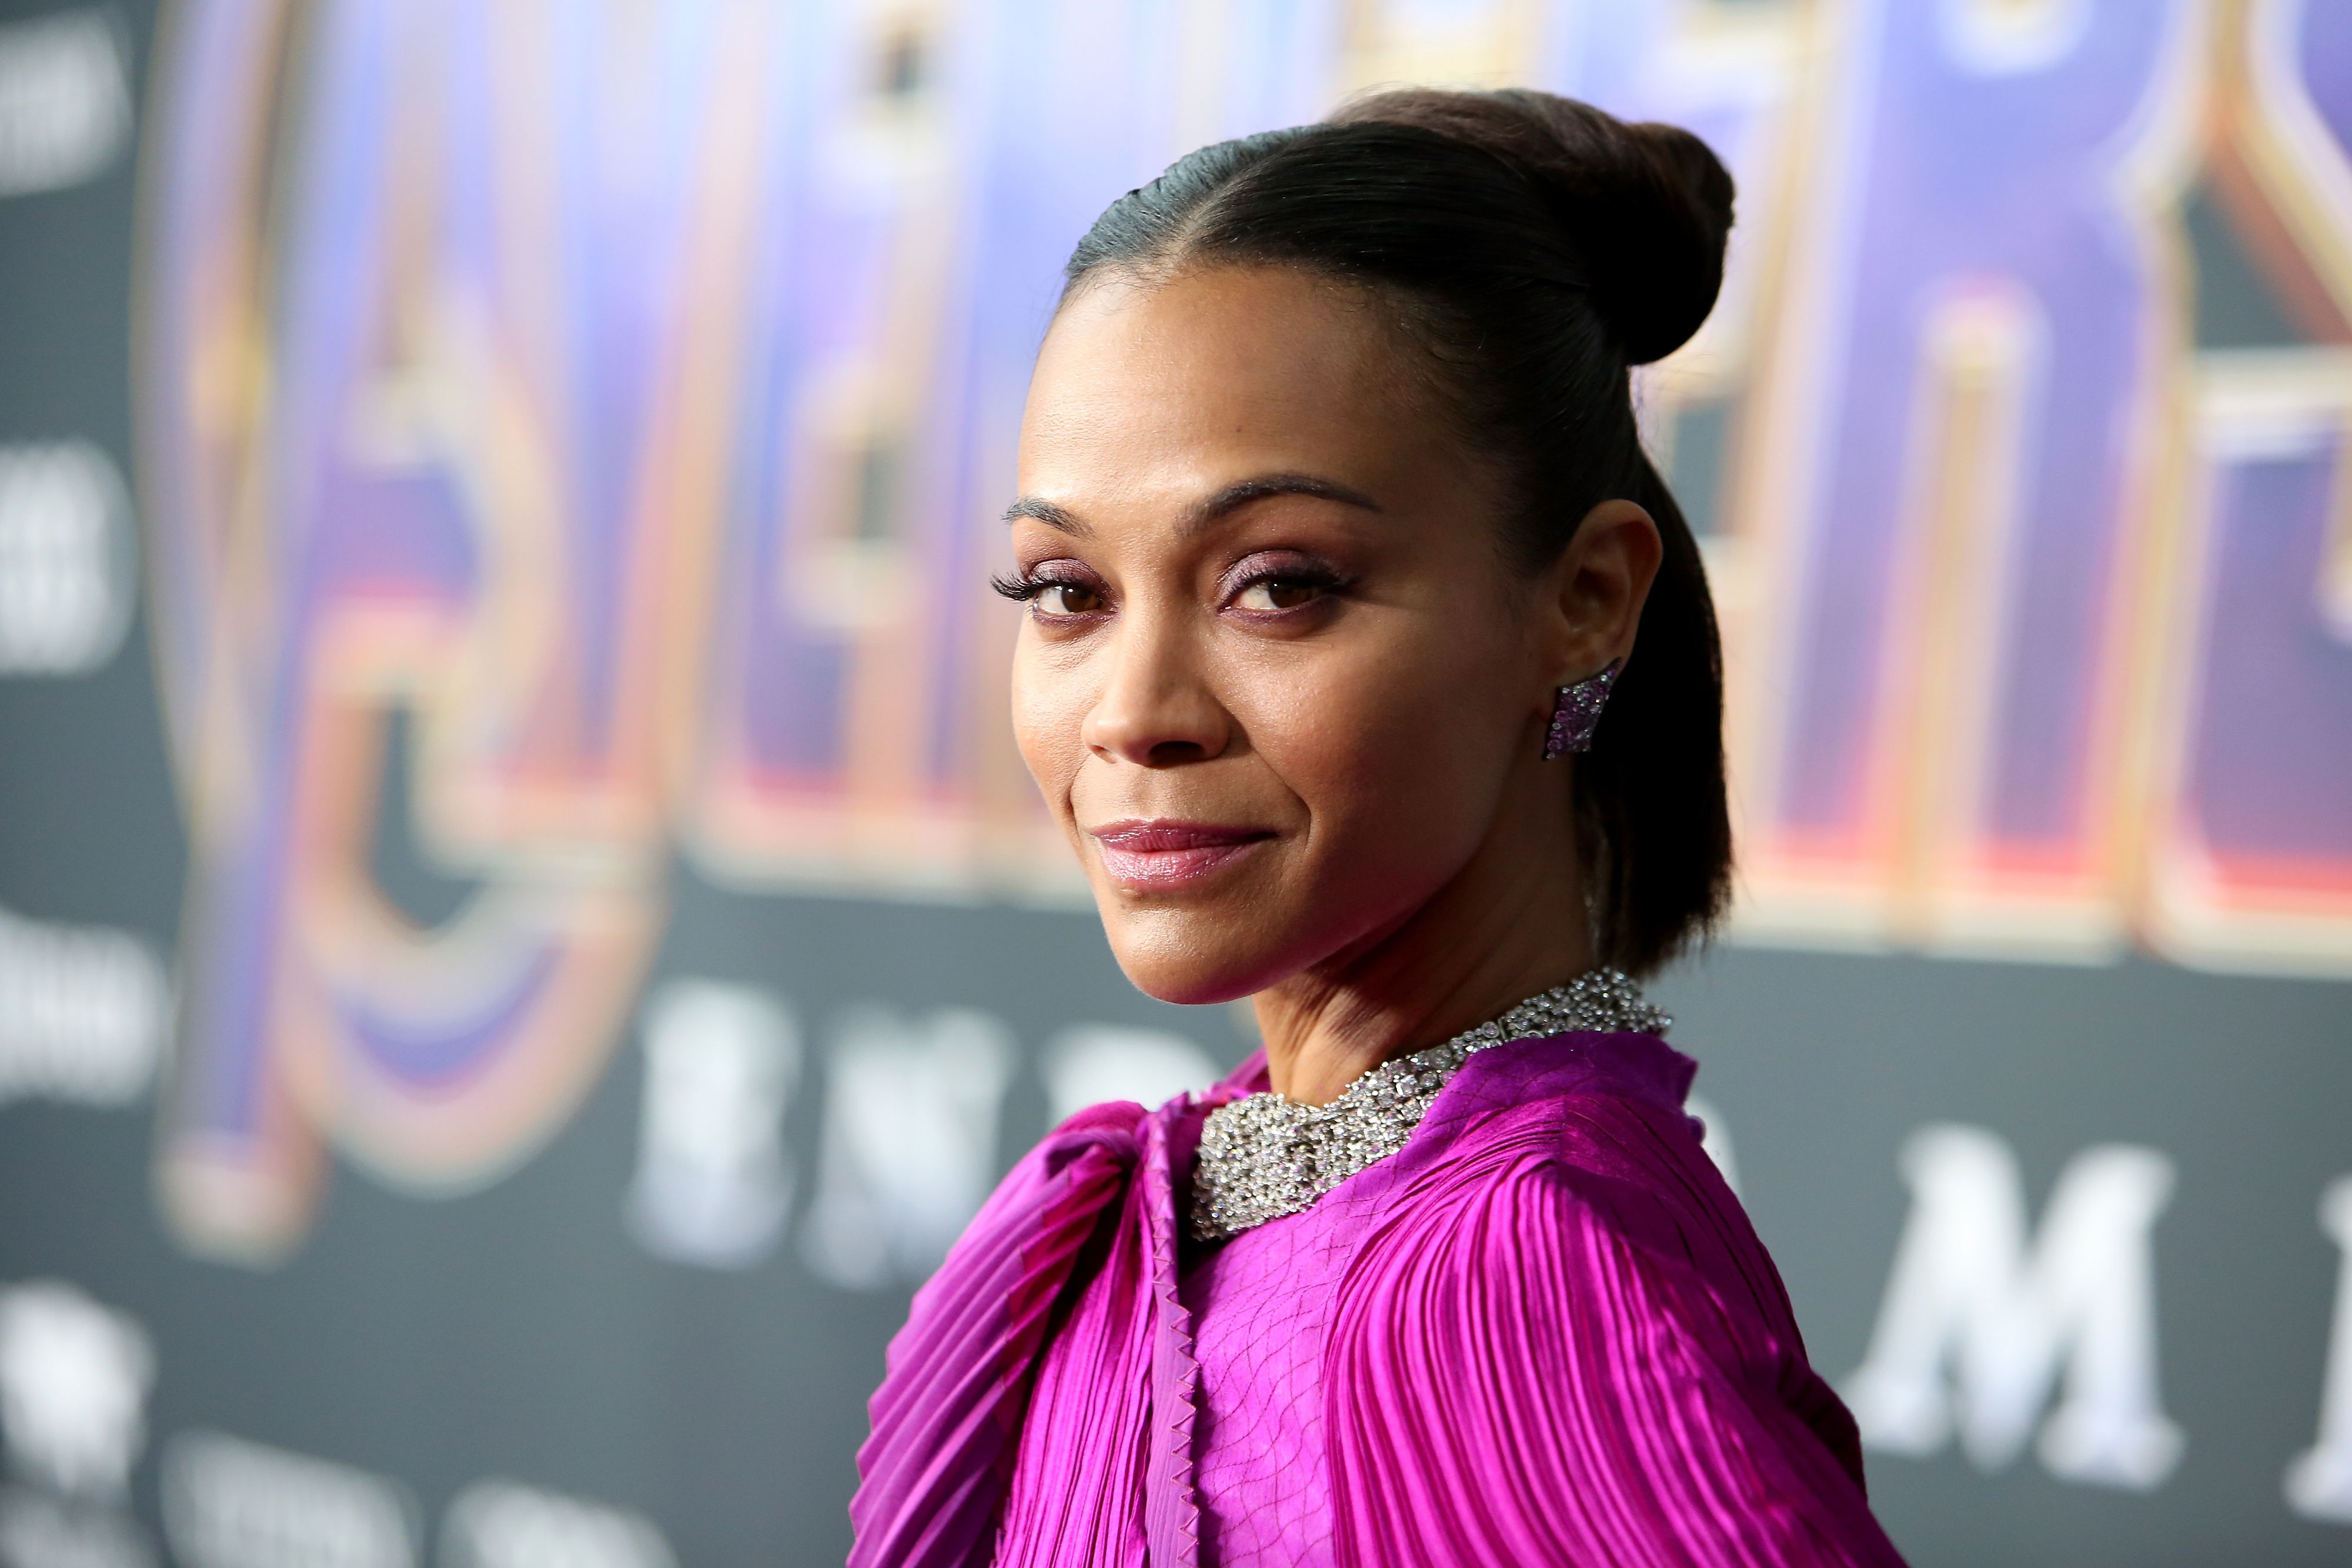 Zoe Saldana Interview - Building the BESE business, being a working mother  and representation